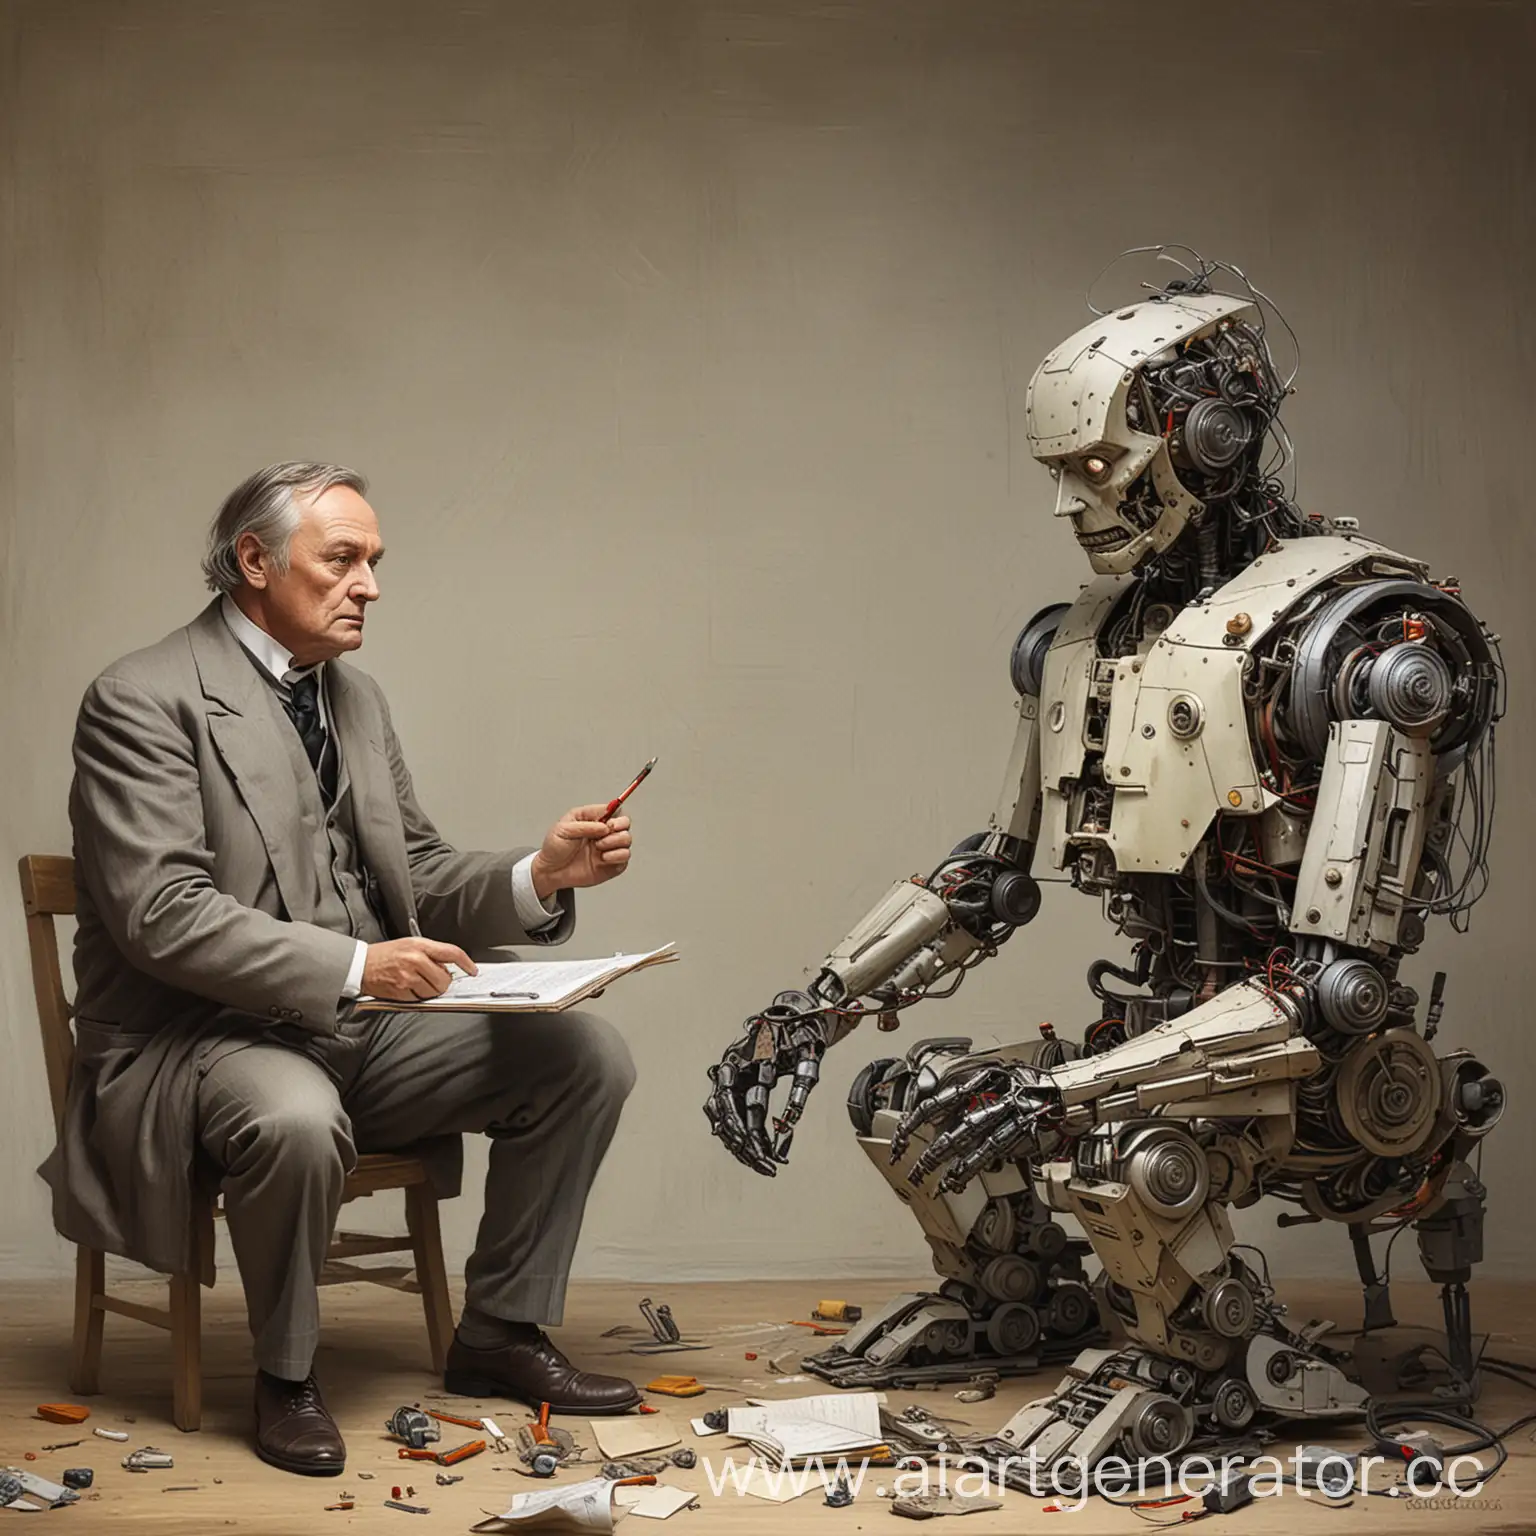 Sergey-Korolev-Hegel-and-Robot-Discussing-Energy-Concepts